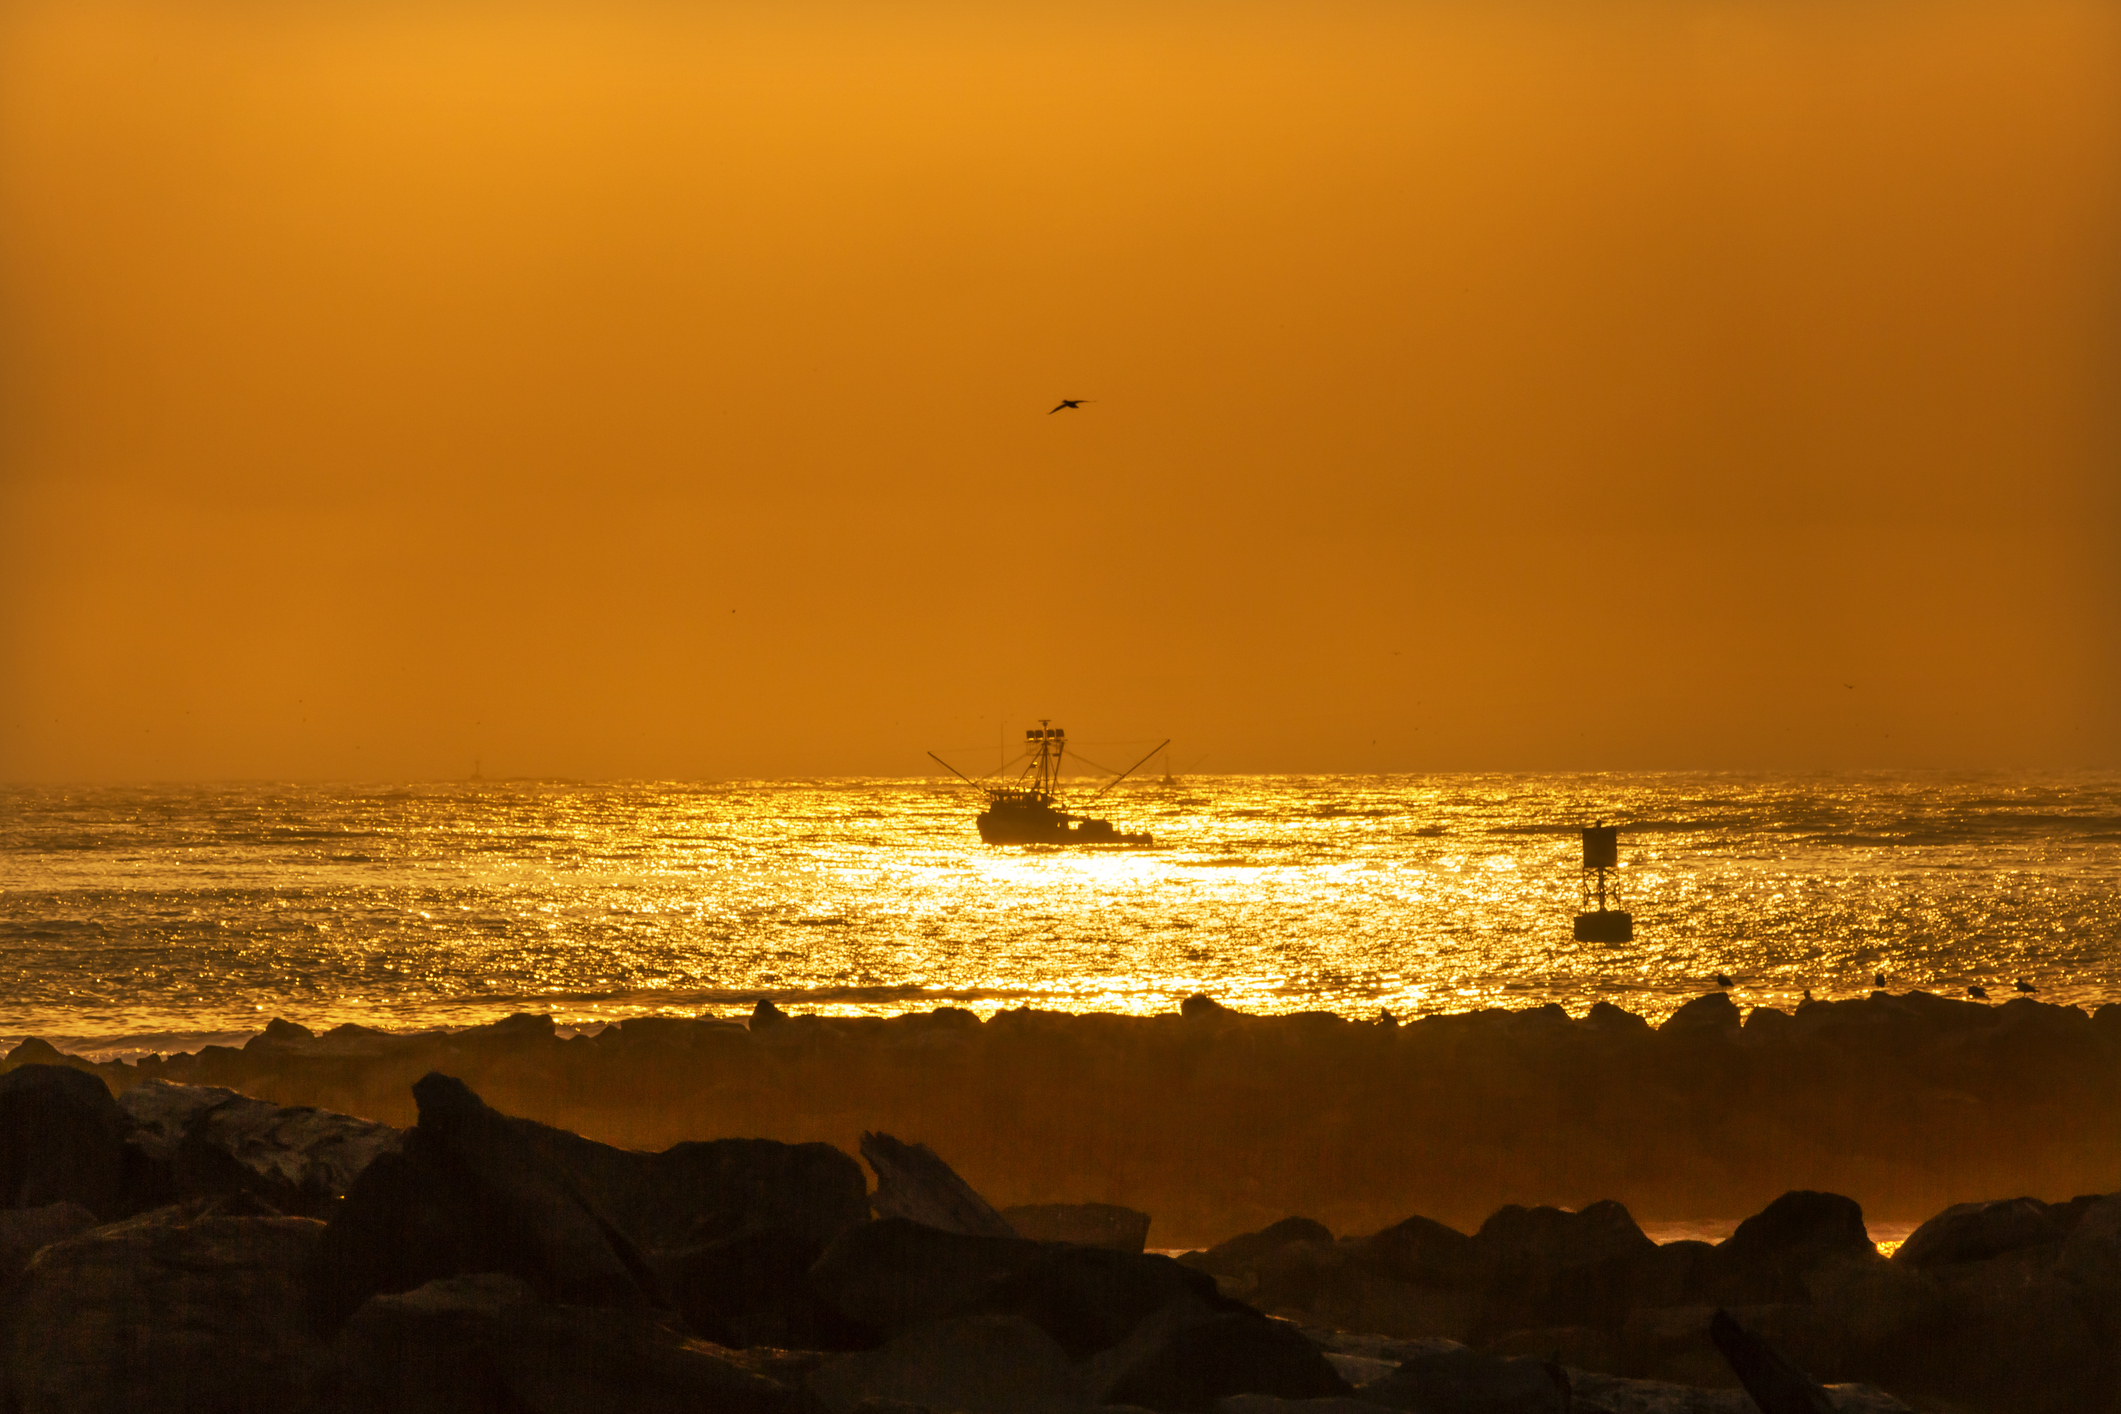 A fishing boat on golden waters during sunset.